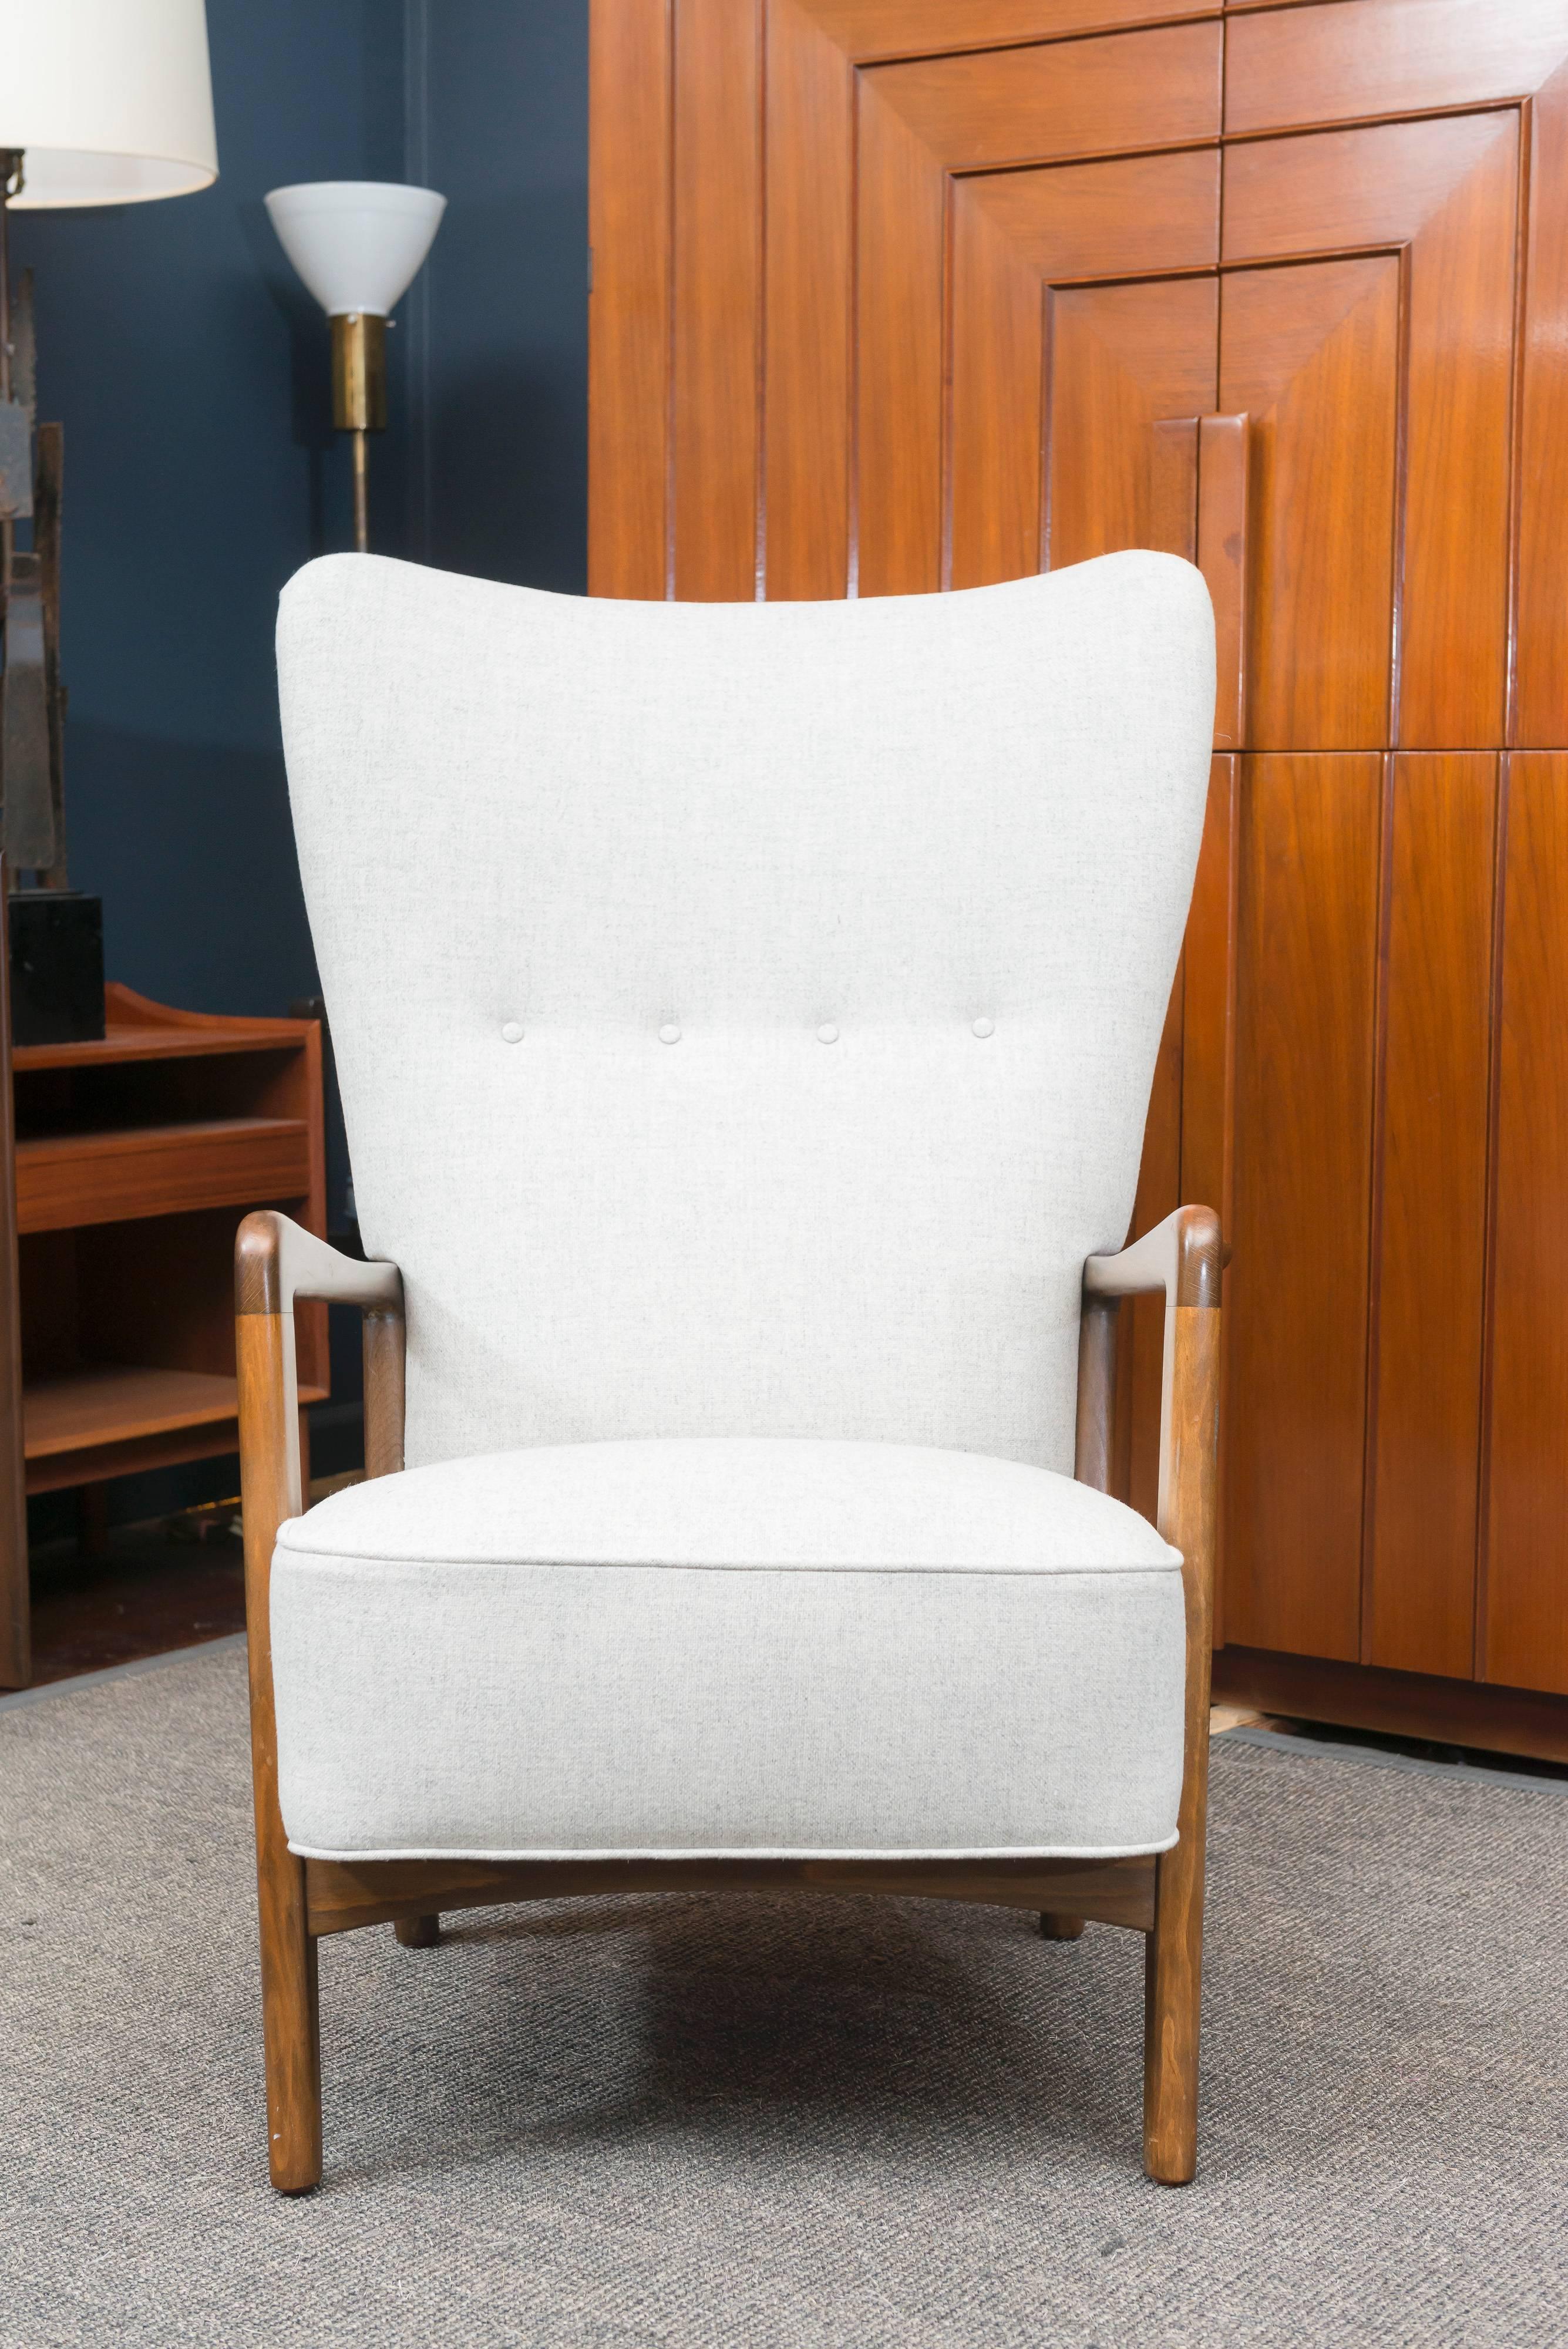 Scandinavian wing chair designed by Soren Hansen for Fritz Hansen, Sweden. Sturdy open-arm frame made from stained beechwood with new wool upholstery.